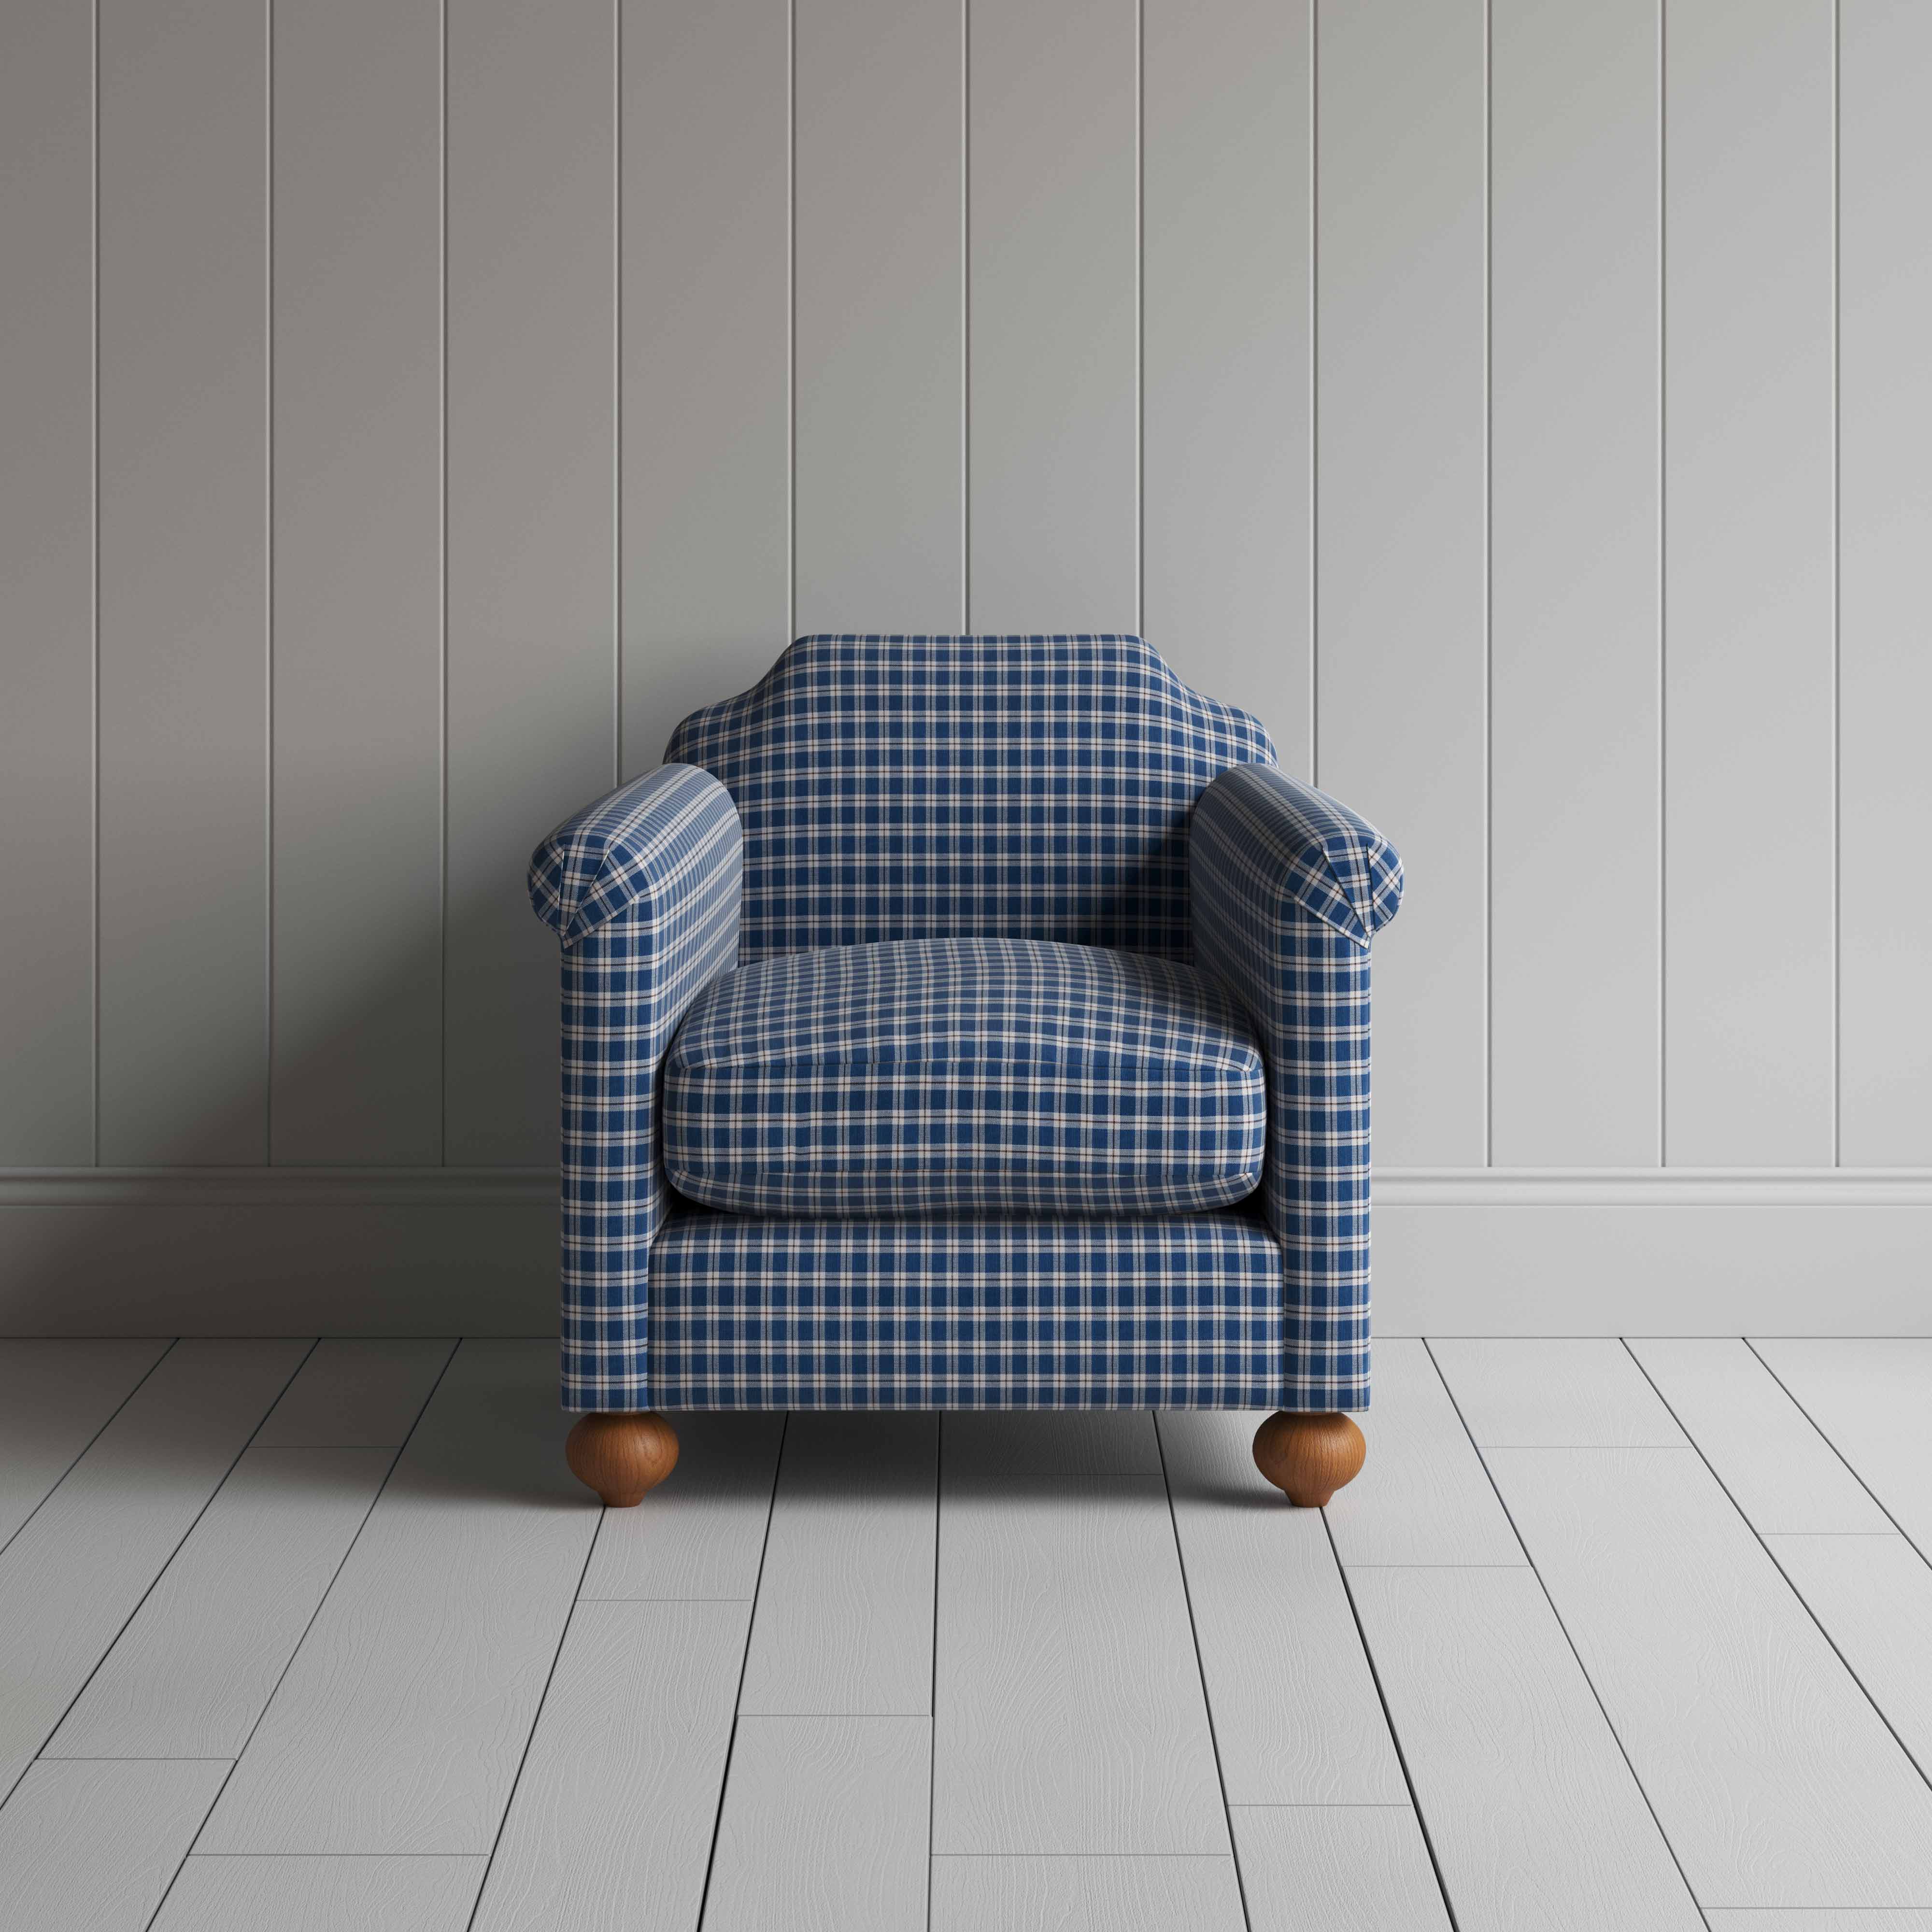  Dolittle Armchair in Well Plaid Cotton, Blue Brown 